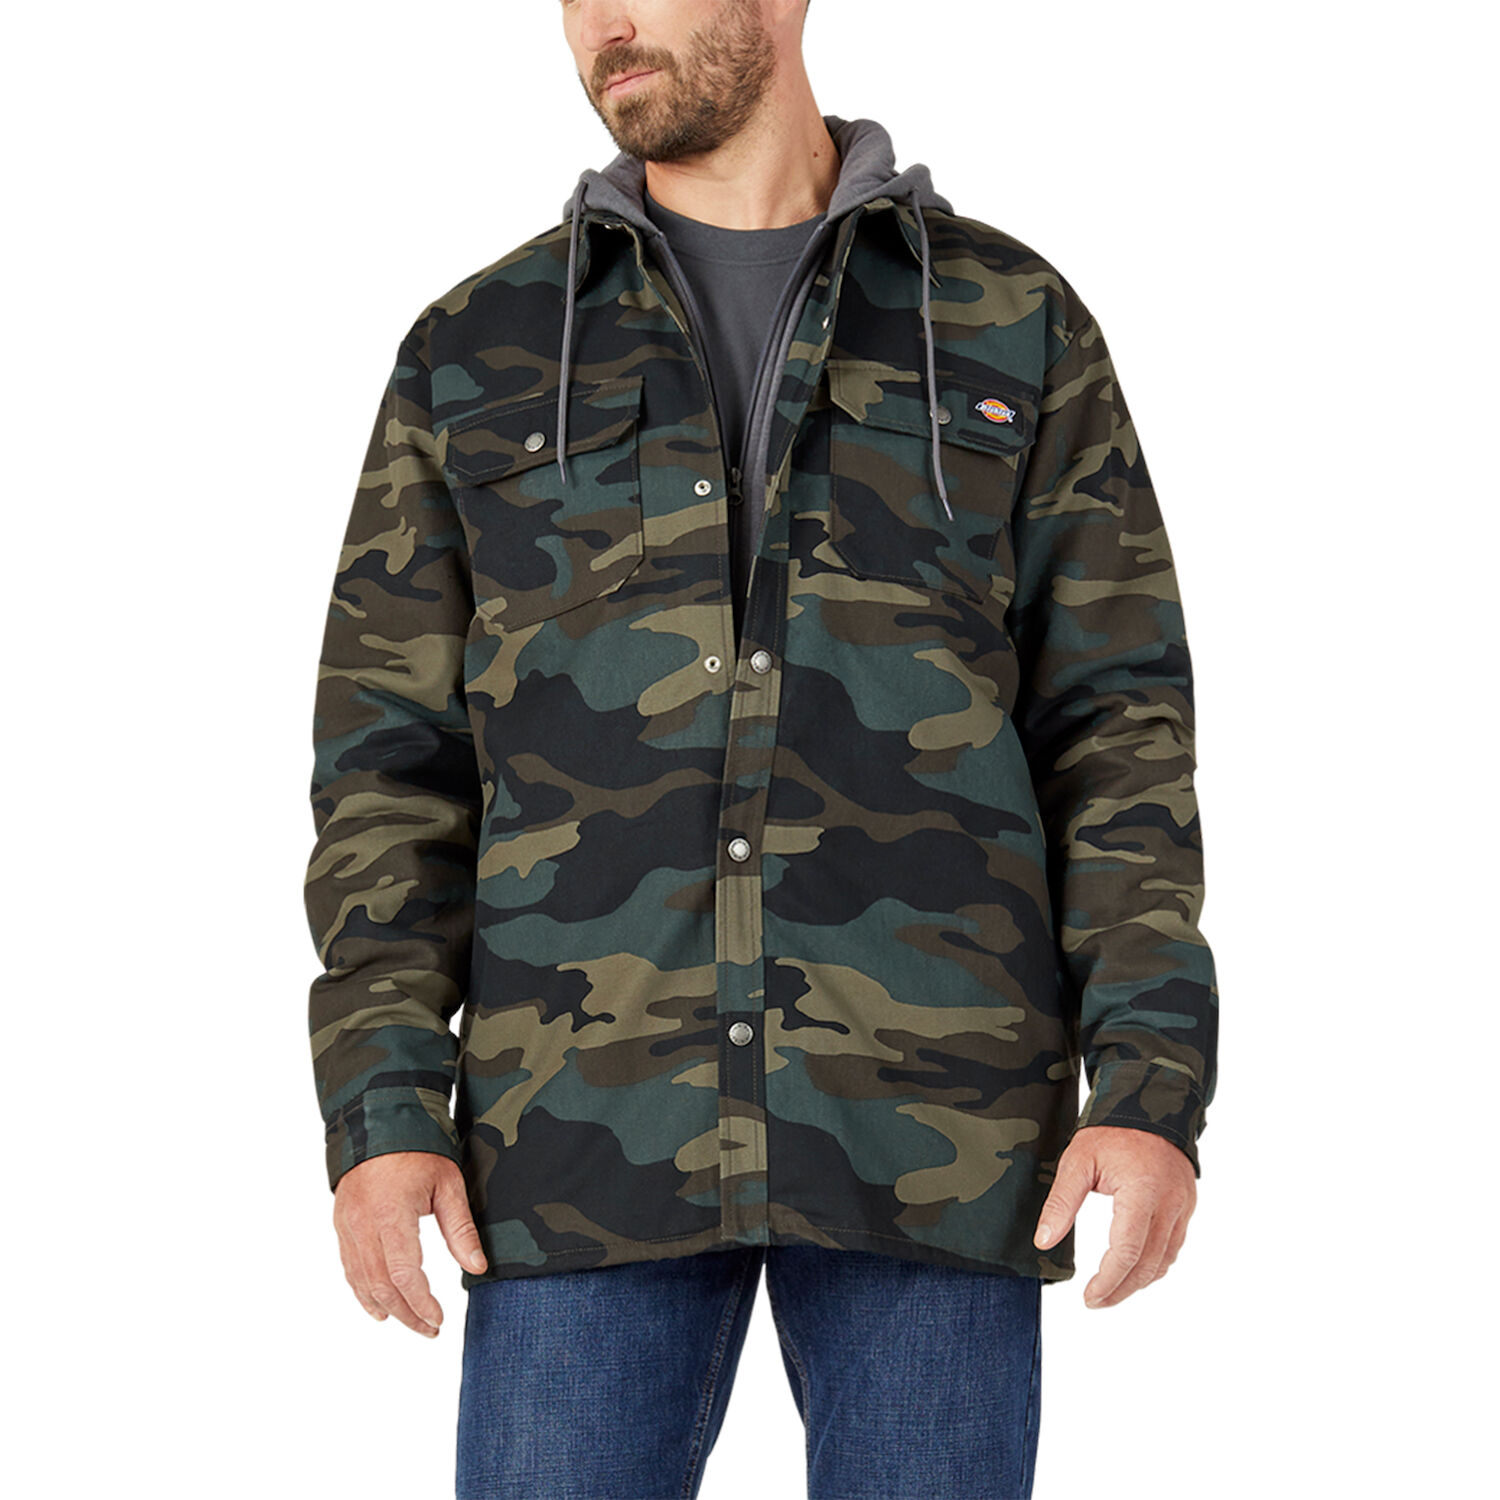 Træde tilbage fordrejer Moden Men's Dickies Hydroshield Duck Hooded Shirt Jacket in Green Camo - Shirts |  Dickies | Coastal Country